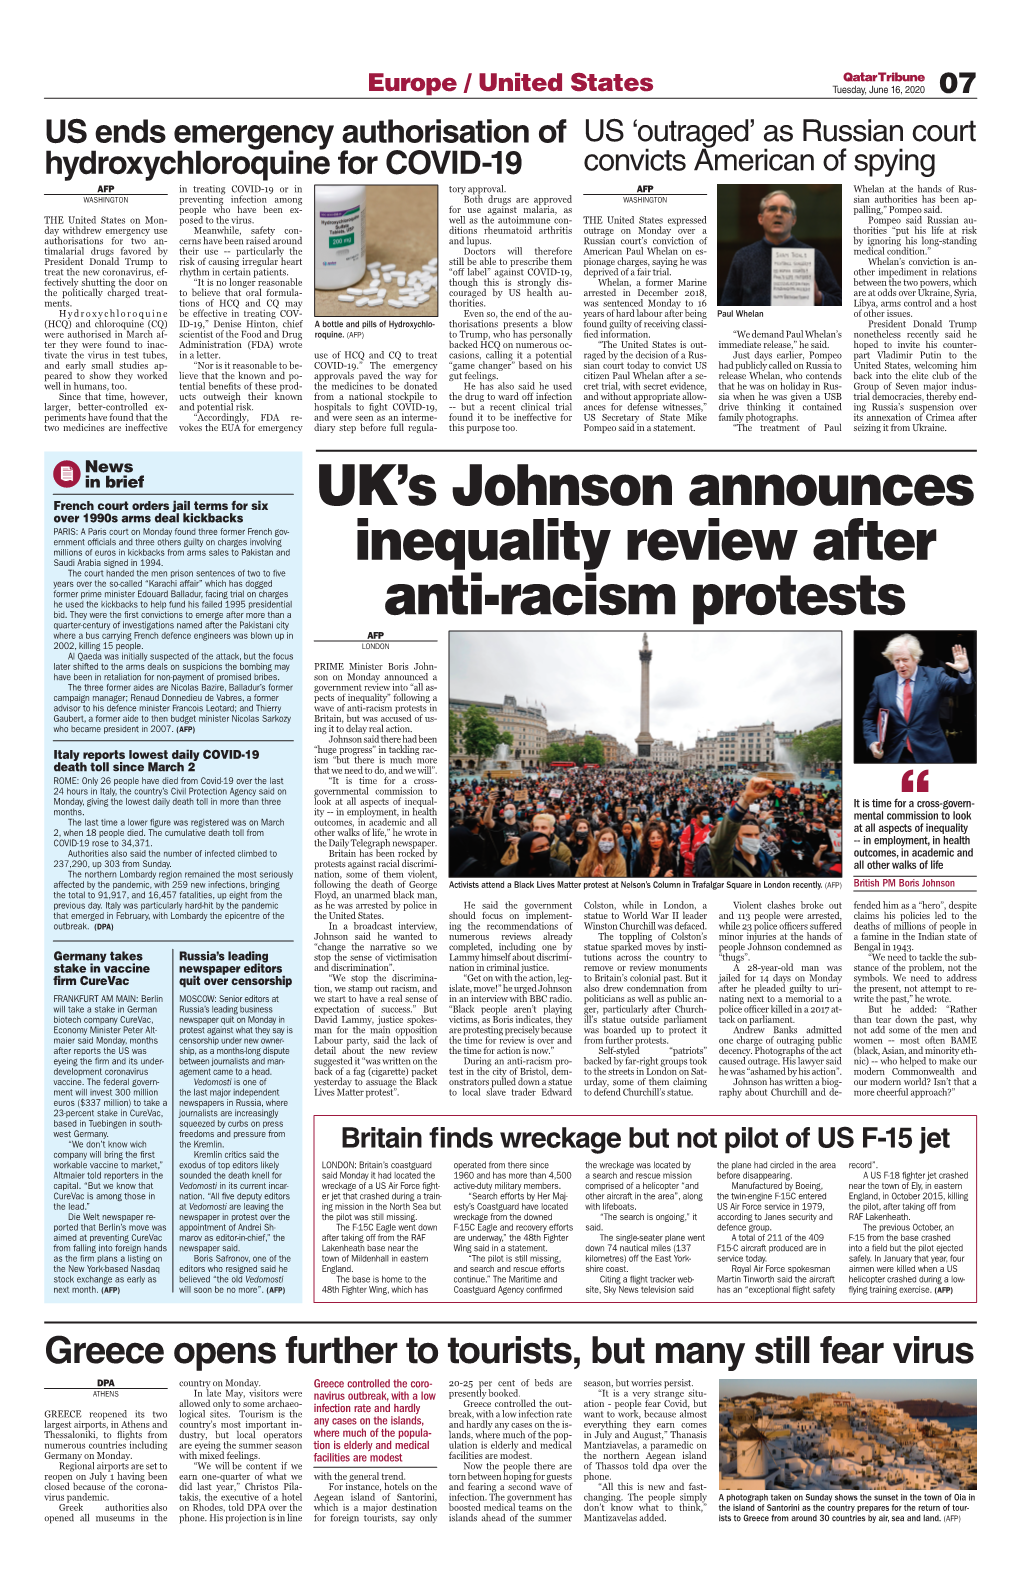 UK's Johnson Announces Inequality Review After Anti-Racism Protests